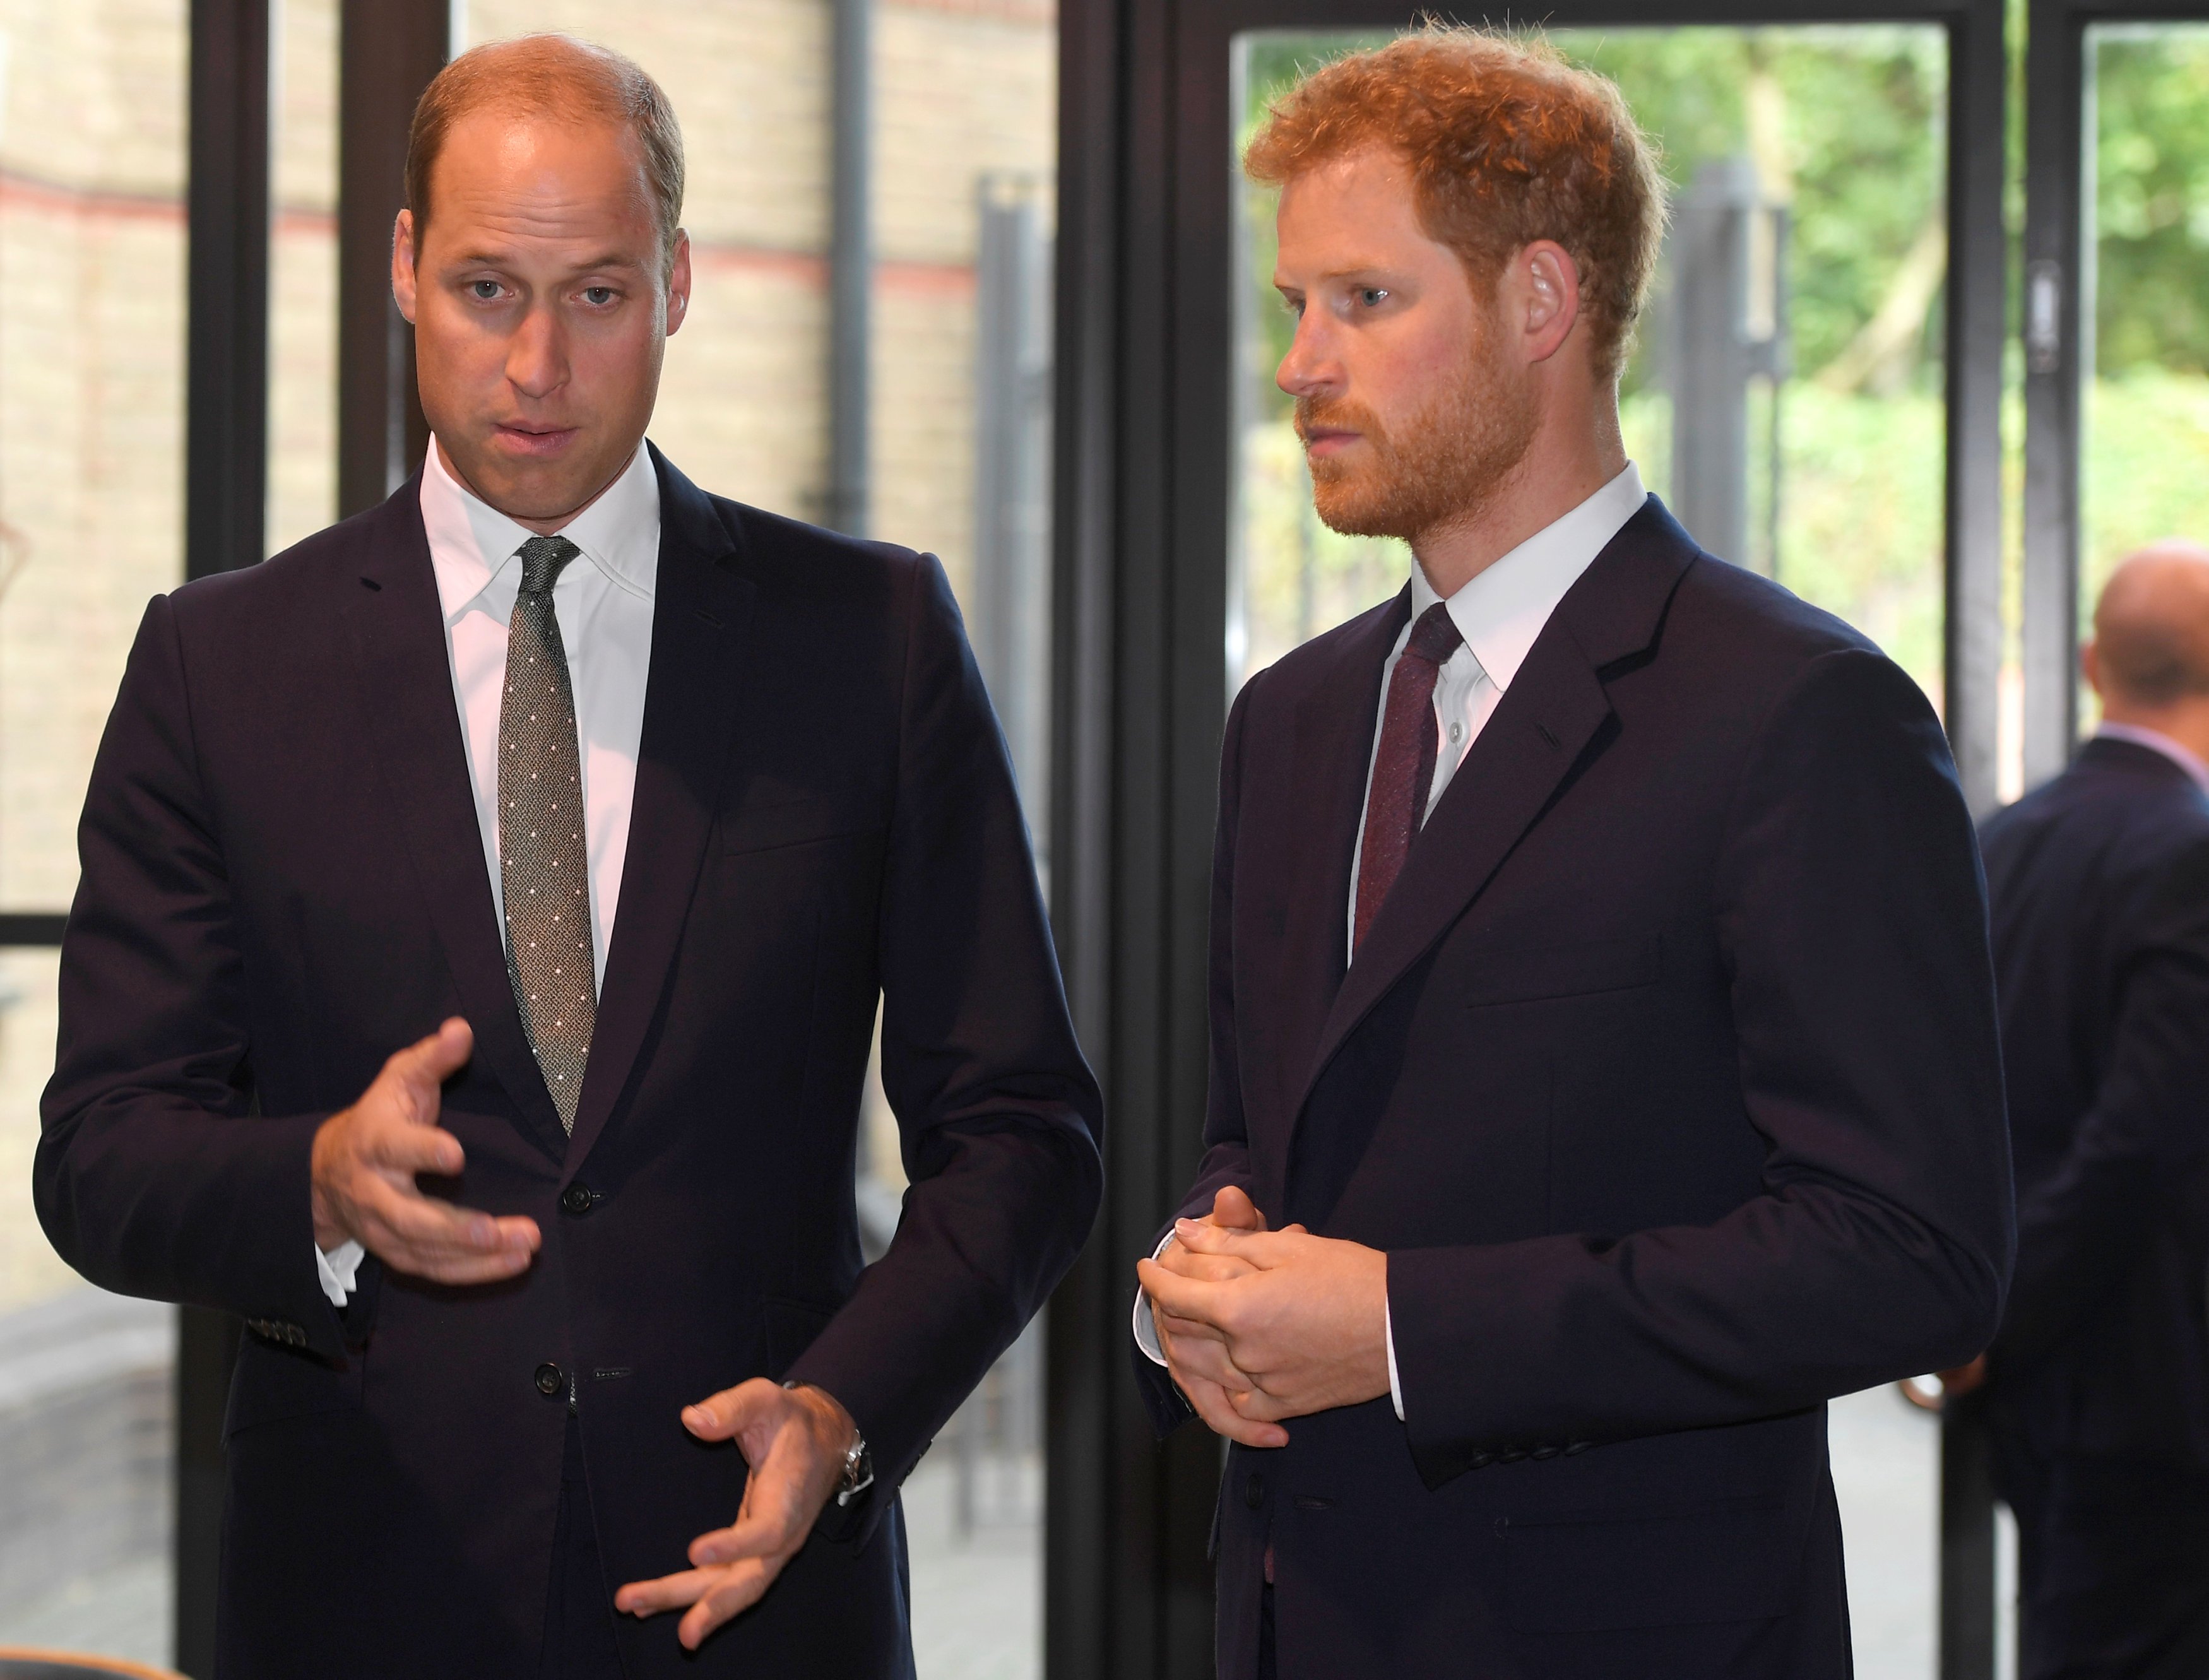 Prince William, Duke of Cambridge and Prince Harry arrive during a visit to the Royal Foundation "Support4Grenfell" community hub on September 5, 2017. | Source: Getty Images